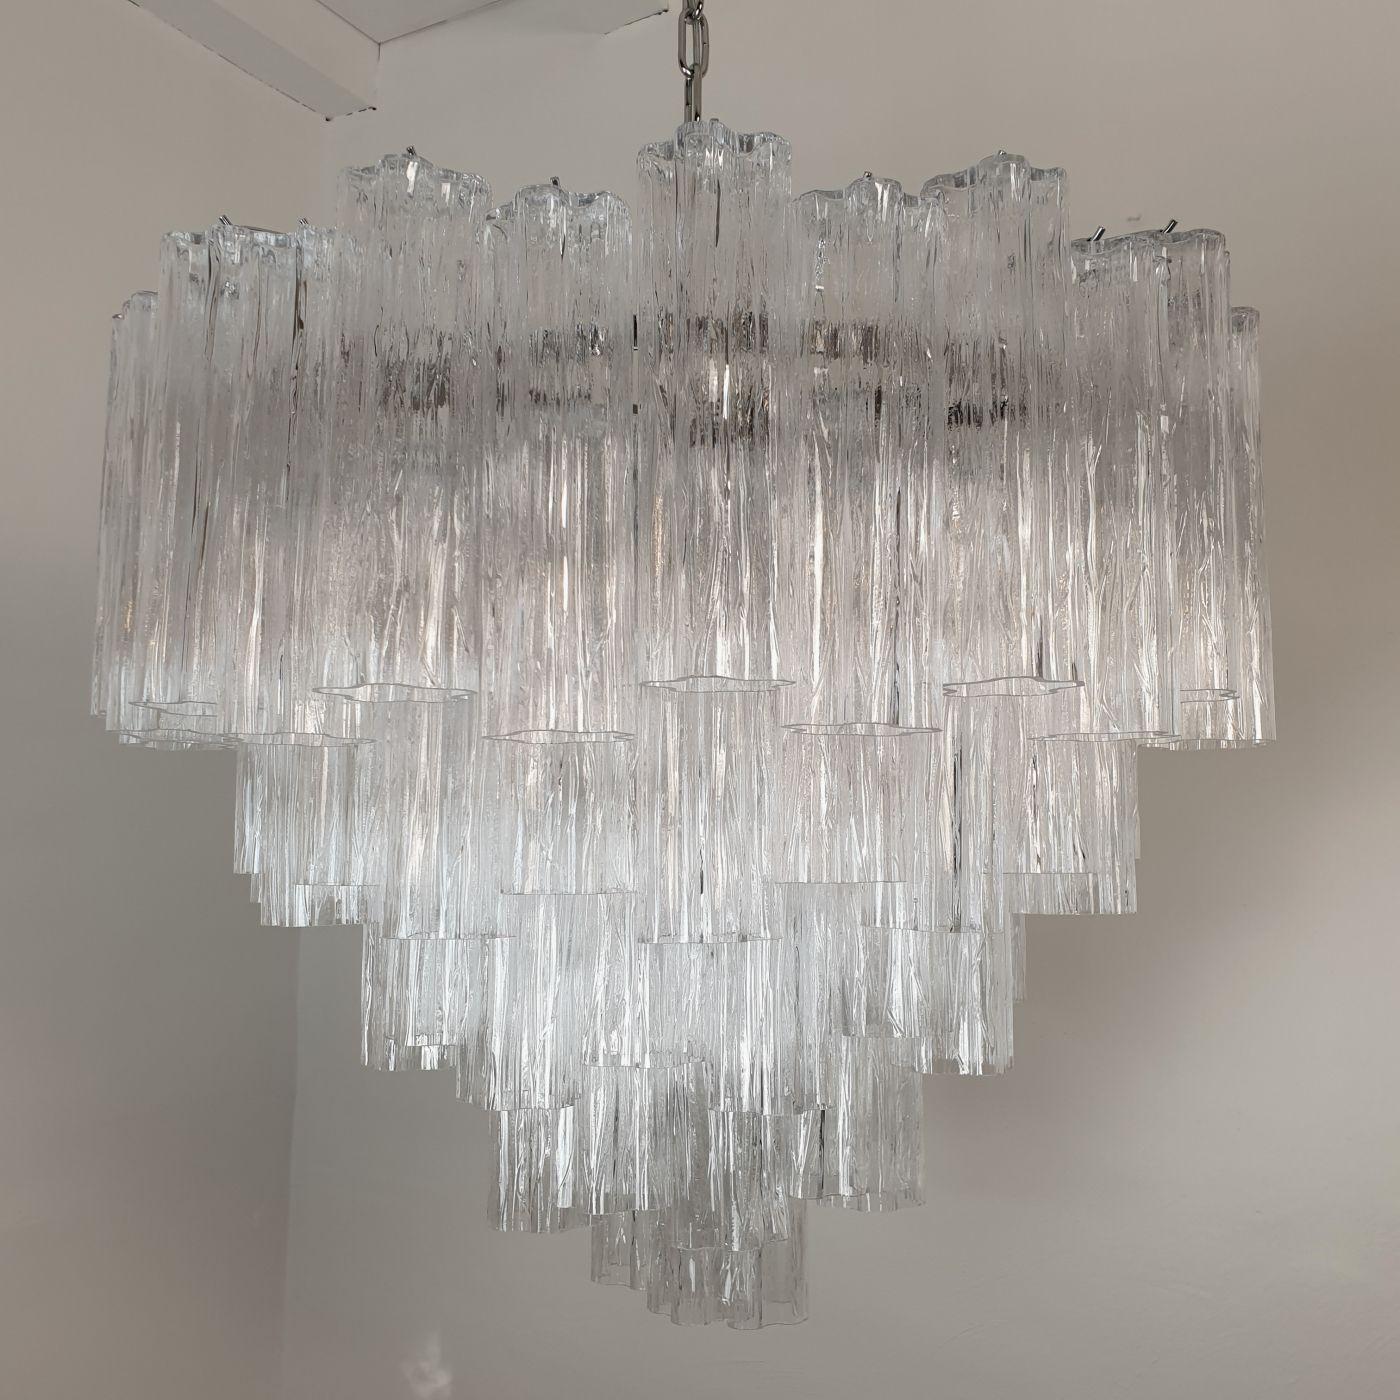 Late 20th Century Tronchi Murano glass Chandelier by Venini For Sale